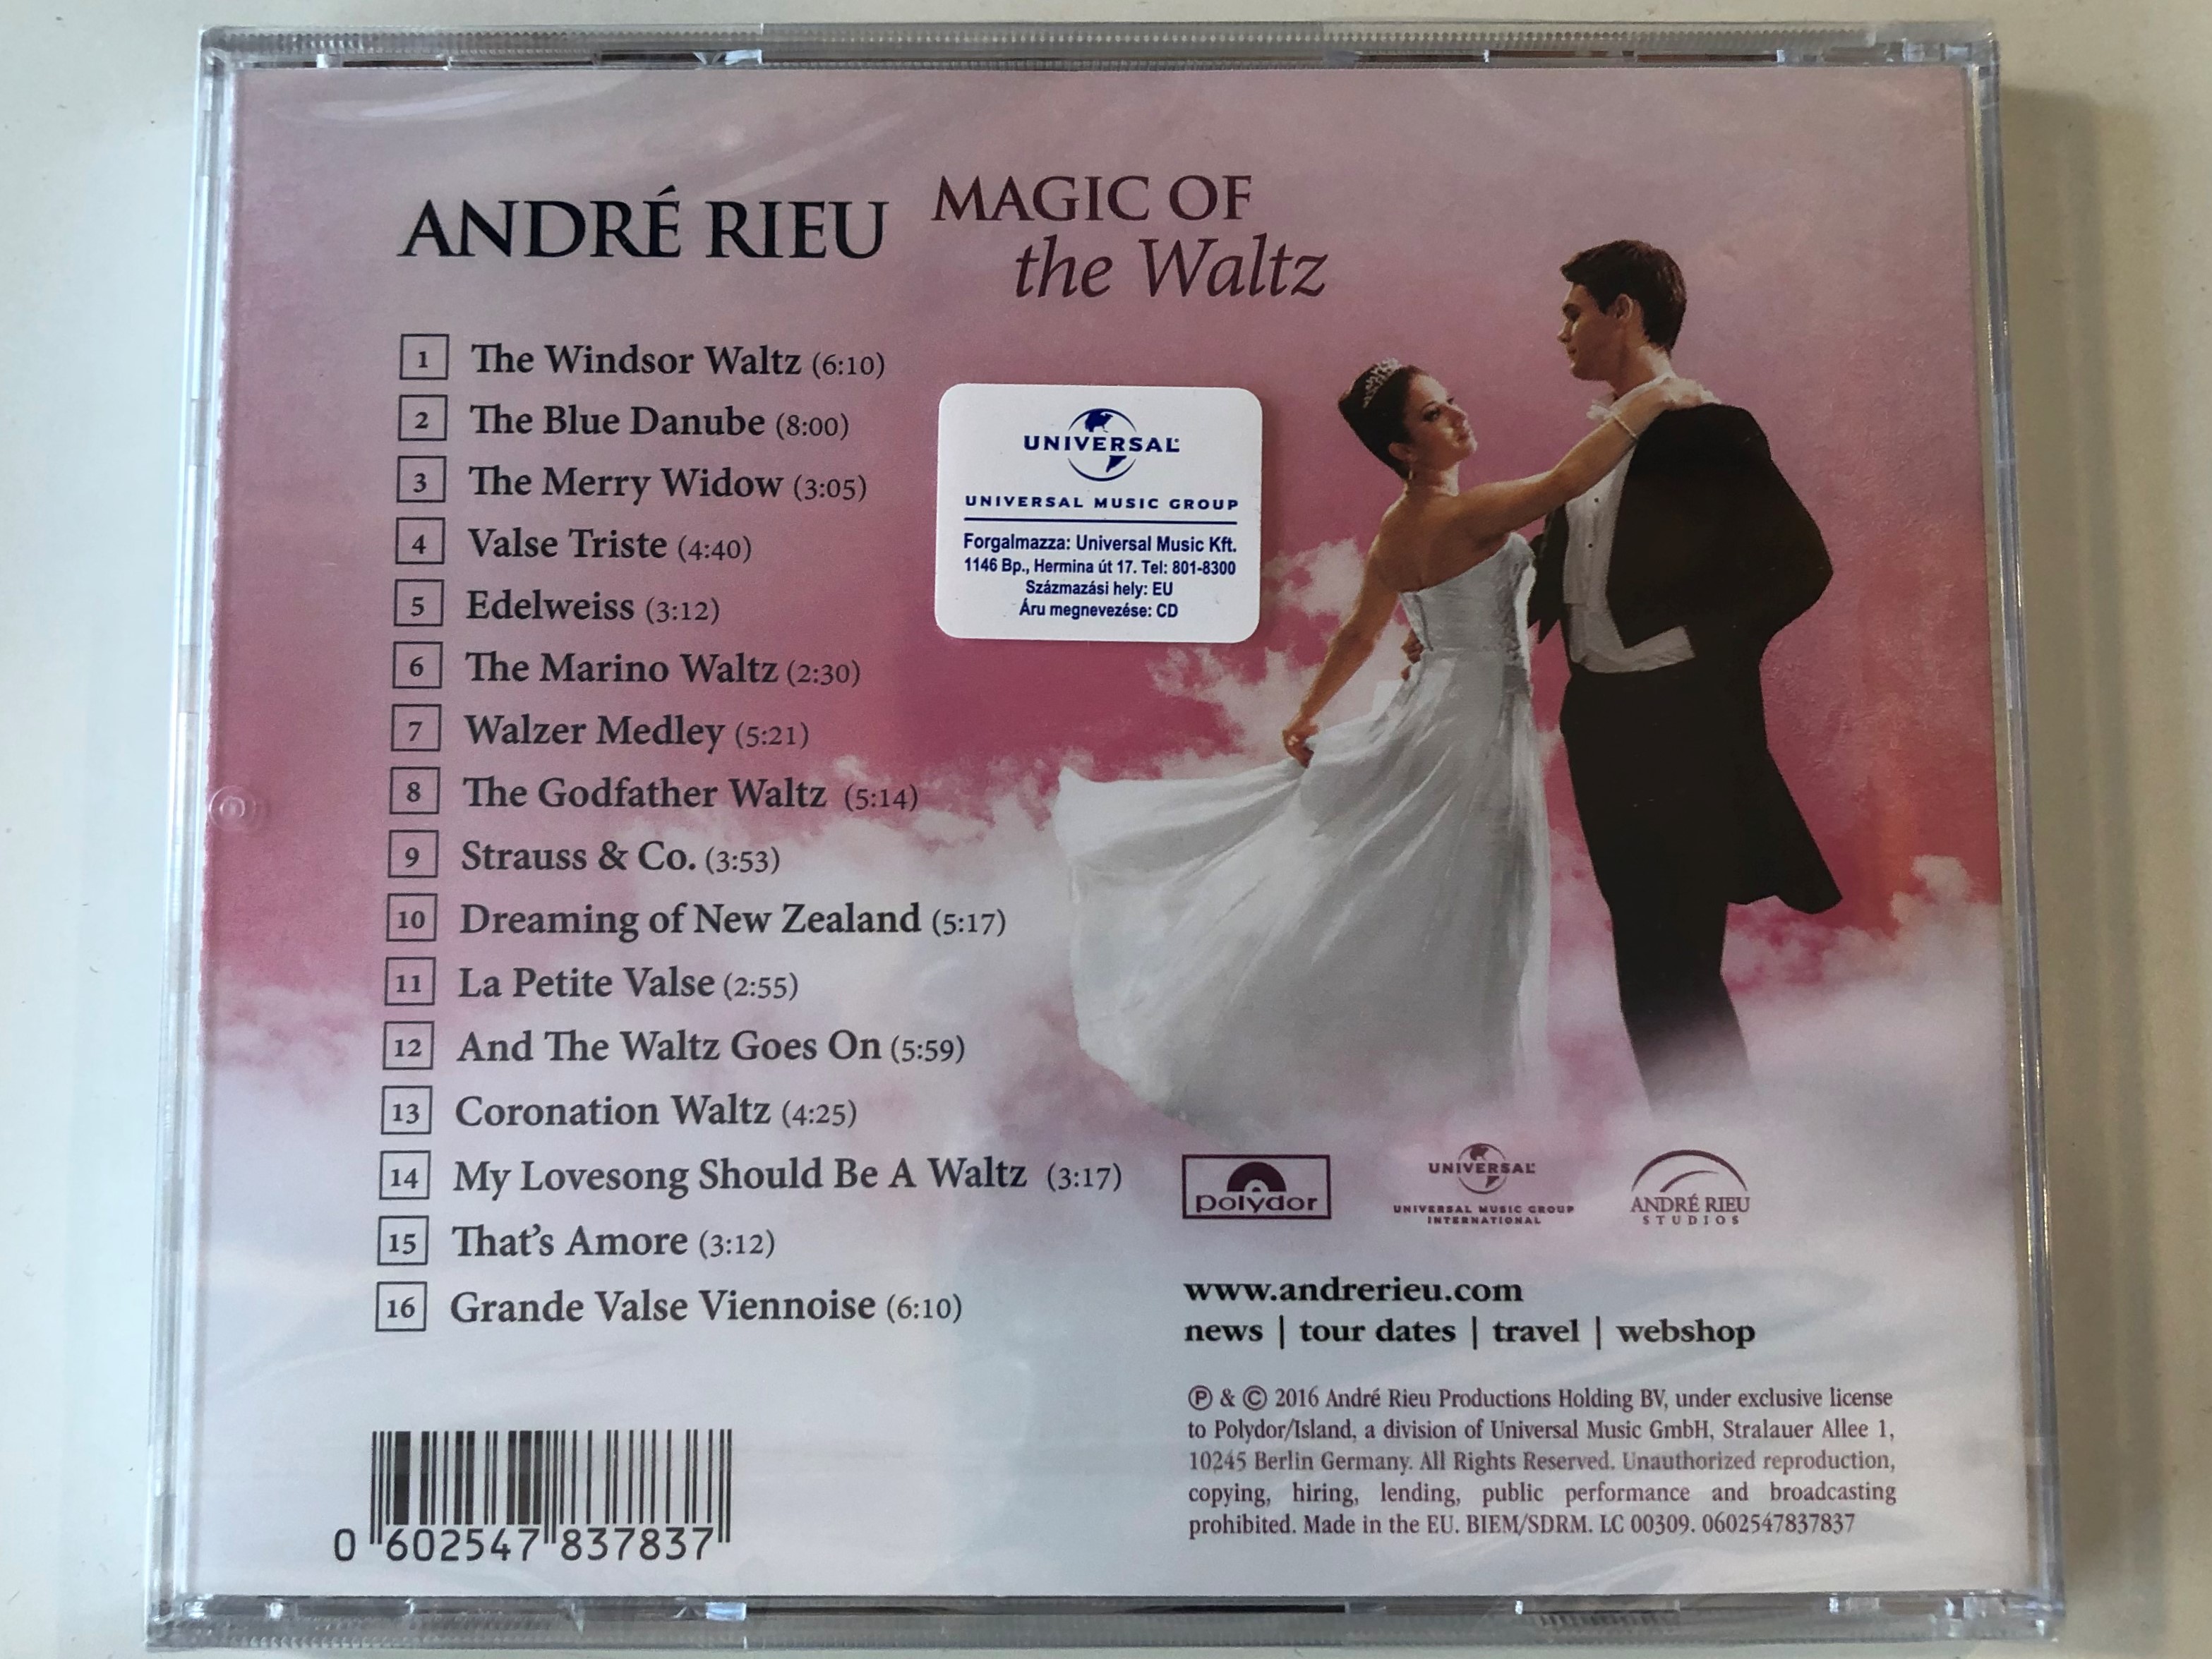 andr-rieu-magic-of-the-walz-the-ultimate-waltz-album-from-the-king-of-the-waltz-features-the-brand-new-windsor-waltz-written-by-andr-rieu-for-the-90th-birthday-of-queen-elizabeth-ii-po.jpg